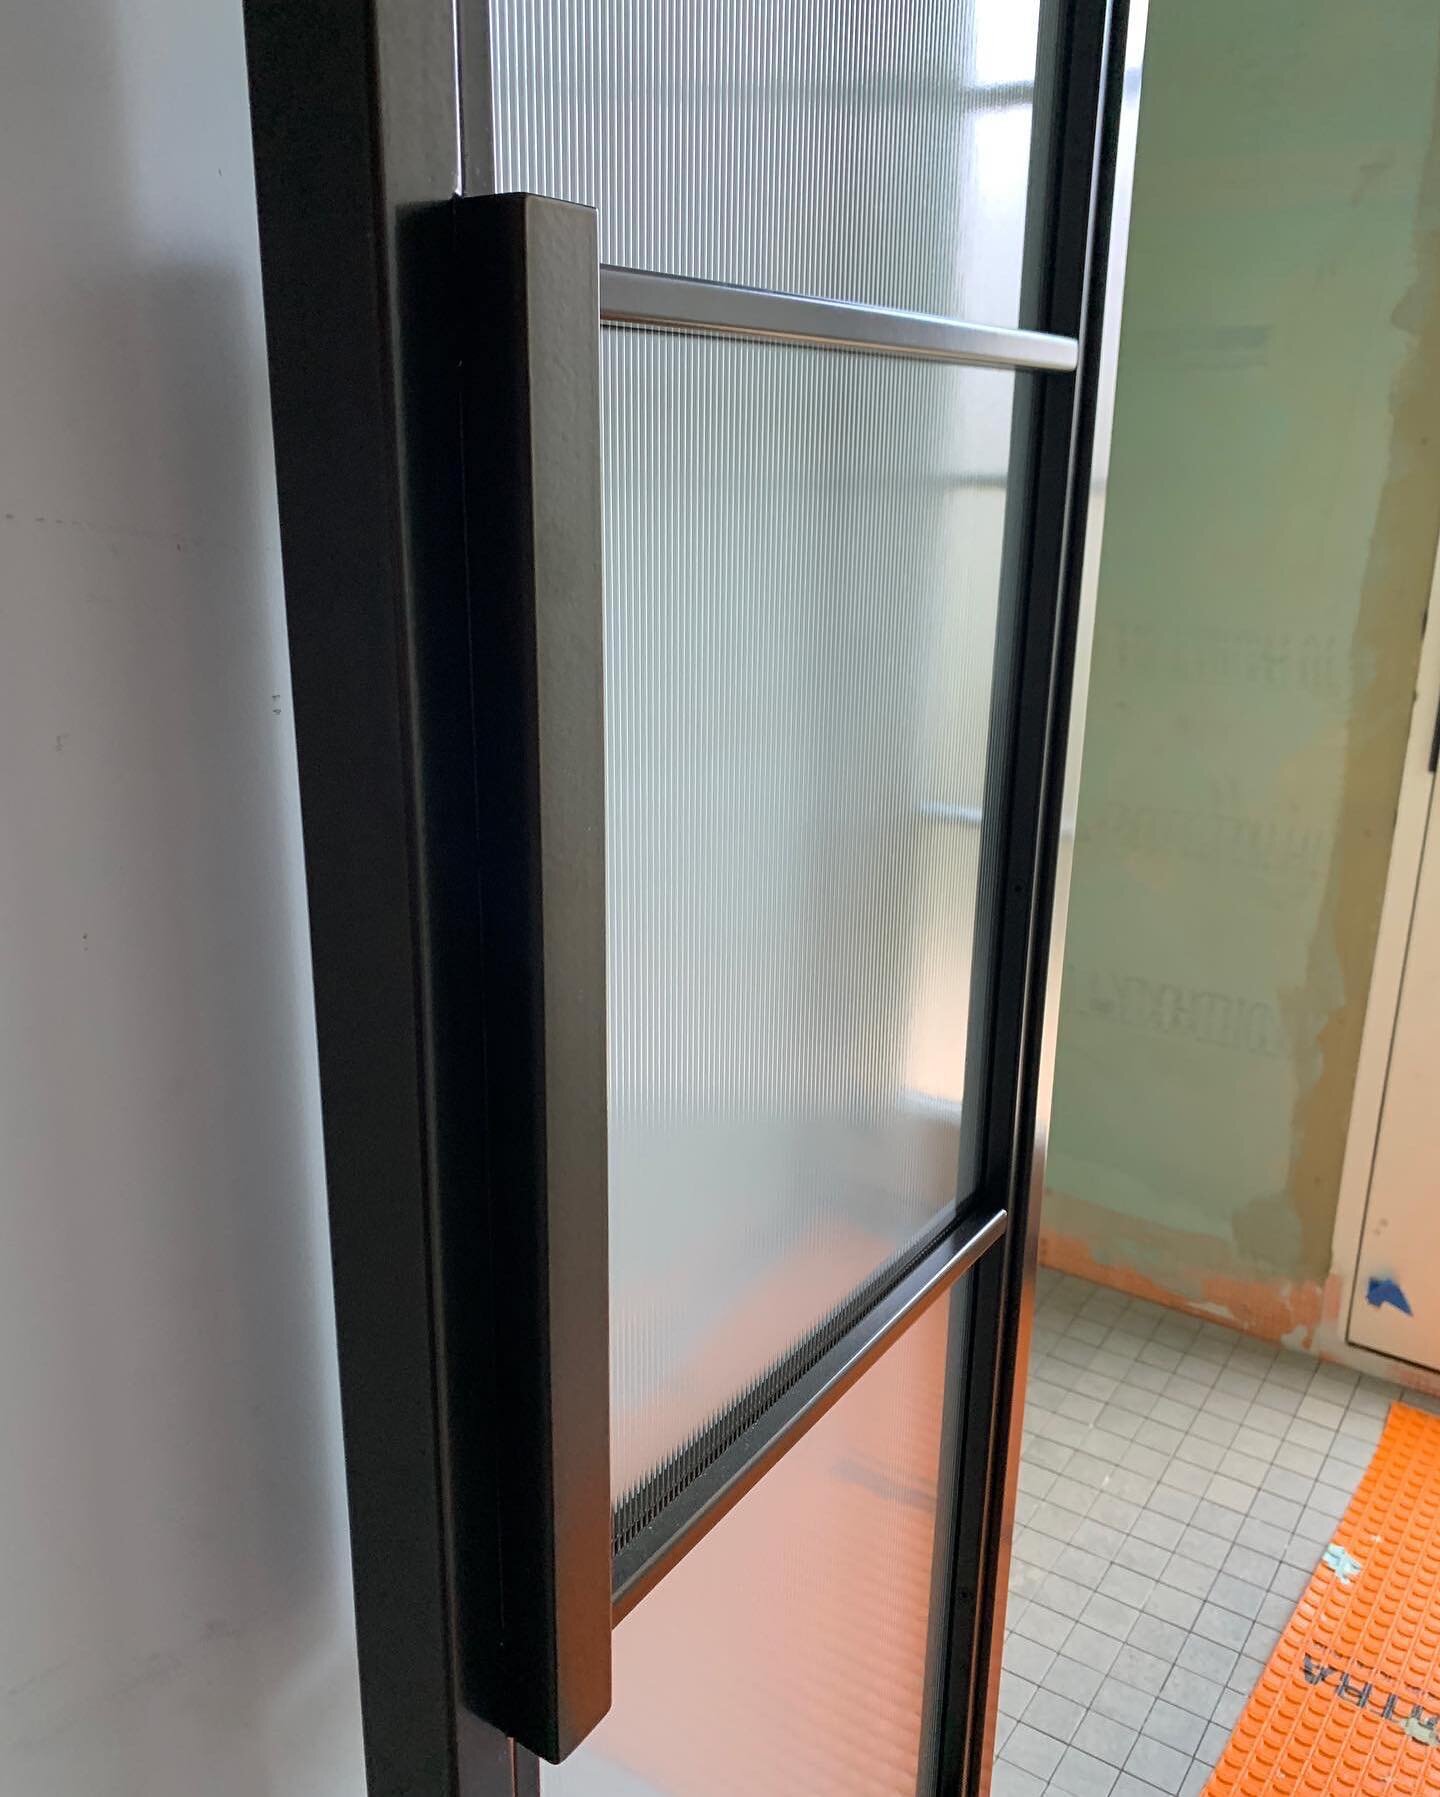 I was so stoked to see our custom @weldworkofficial french doors with reeded glass installed at the job site.  We have two sets of doors facing opposite each other: one leads to a toilet room and the other to a shower room.  I can&rsquo;t gush enough